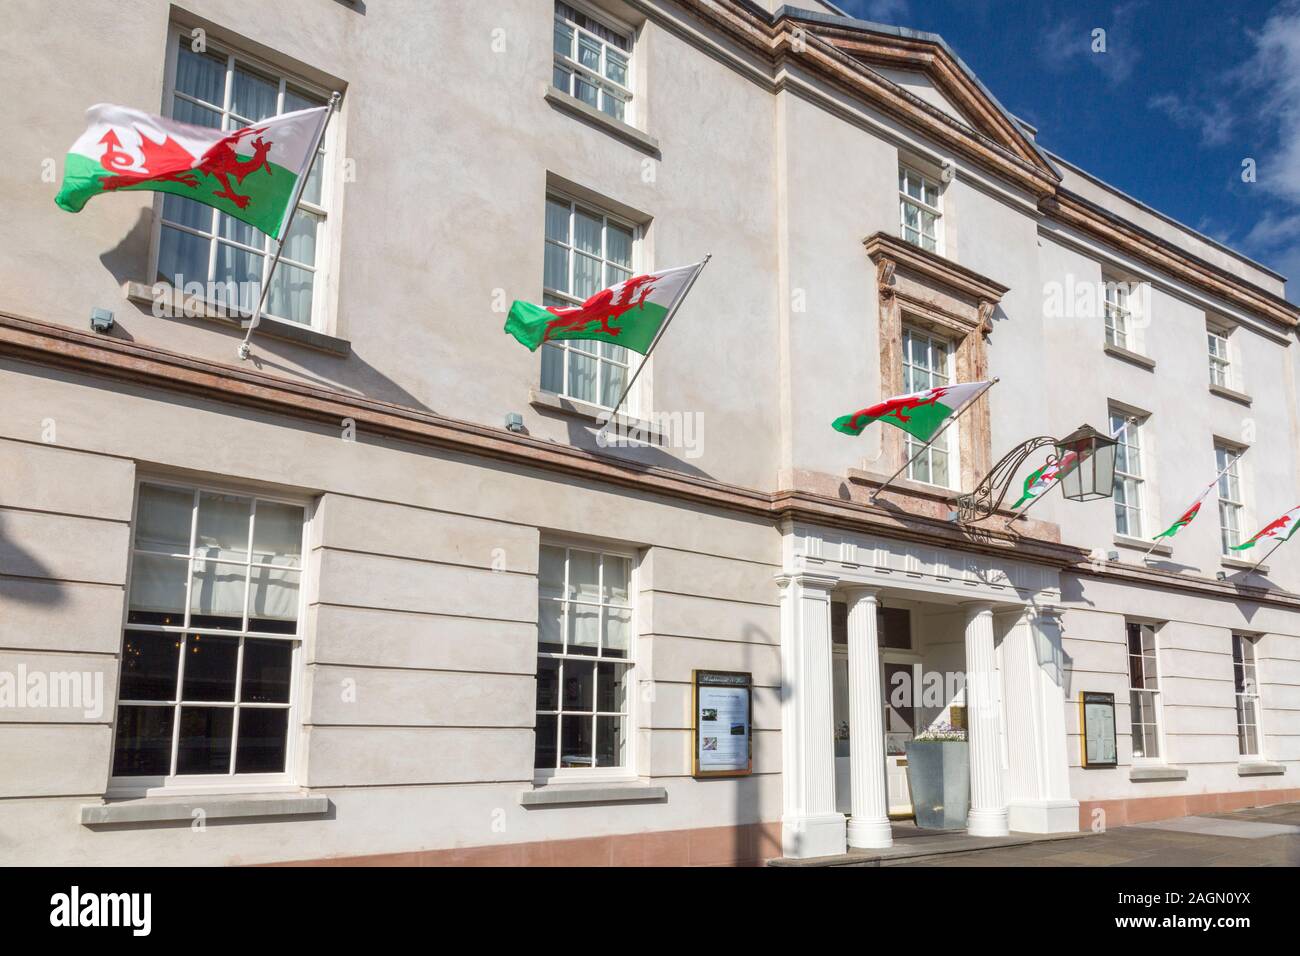 The Welsh flag flies in numbers on the Angel Hotel in Cross Street, Abergavenny, Monmouthshire, Wales, UK Stock Photo